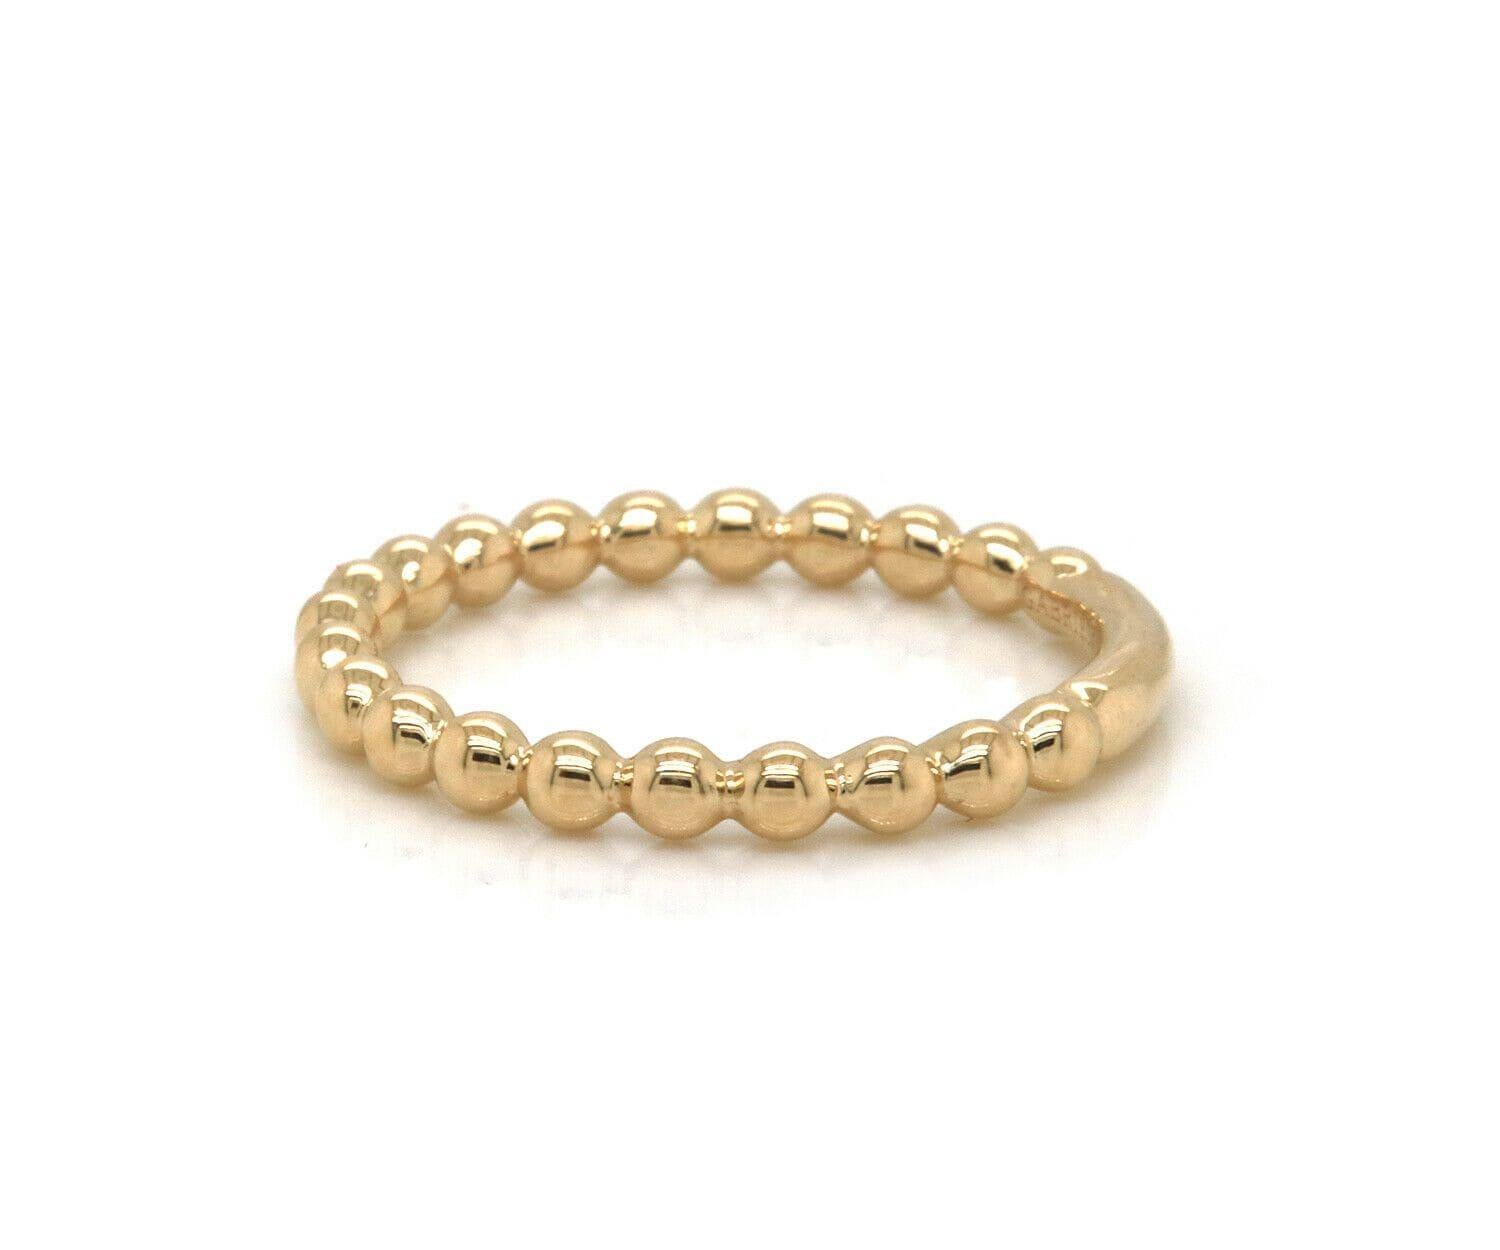 New Gabriel & Co. Bujukan Beaded Stackable Ring in 14K

Gabriel & Co. Bujukan Beaded Stackable Ring
14K Yellow Gold
Band Width: Approx. 2.30 MM
Ring Size: 6.50 (US)
Weight: Approx. 2.20 Grams
Stamped: GABRIEL & CO., 14K, S1279721

Condition:
Offered